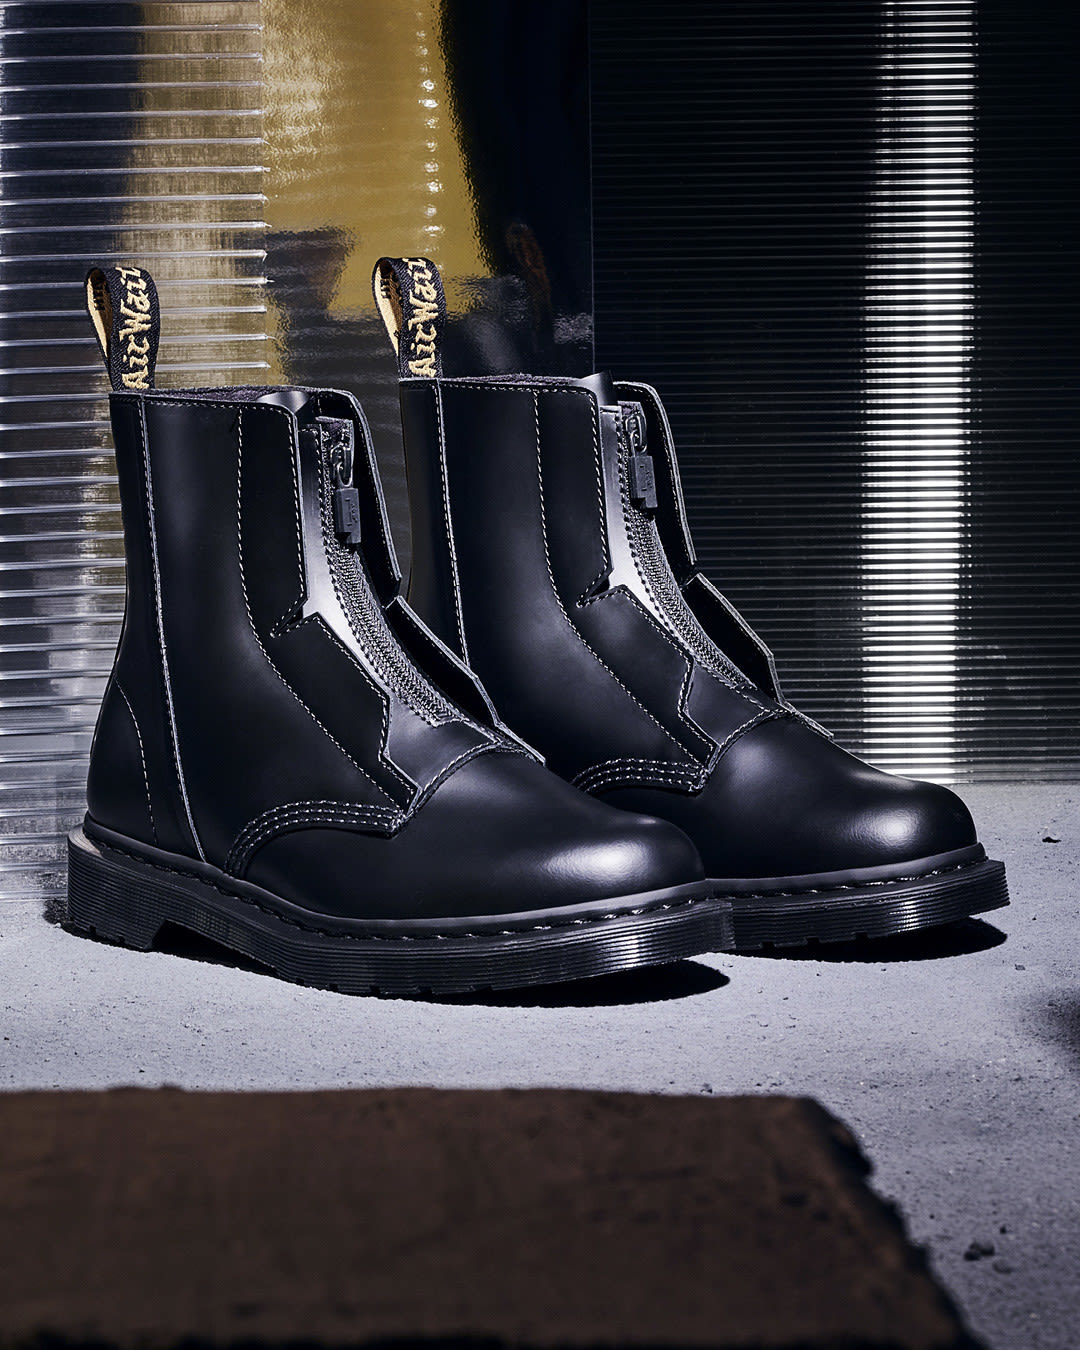 DR. MARTENS × A COLD WALL COLLECTION Image by DR. MARTENS × A COLD WALL